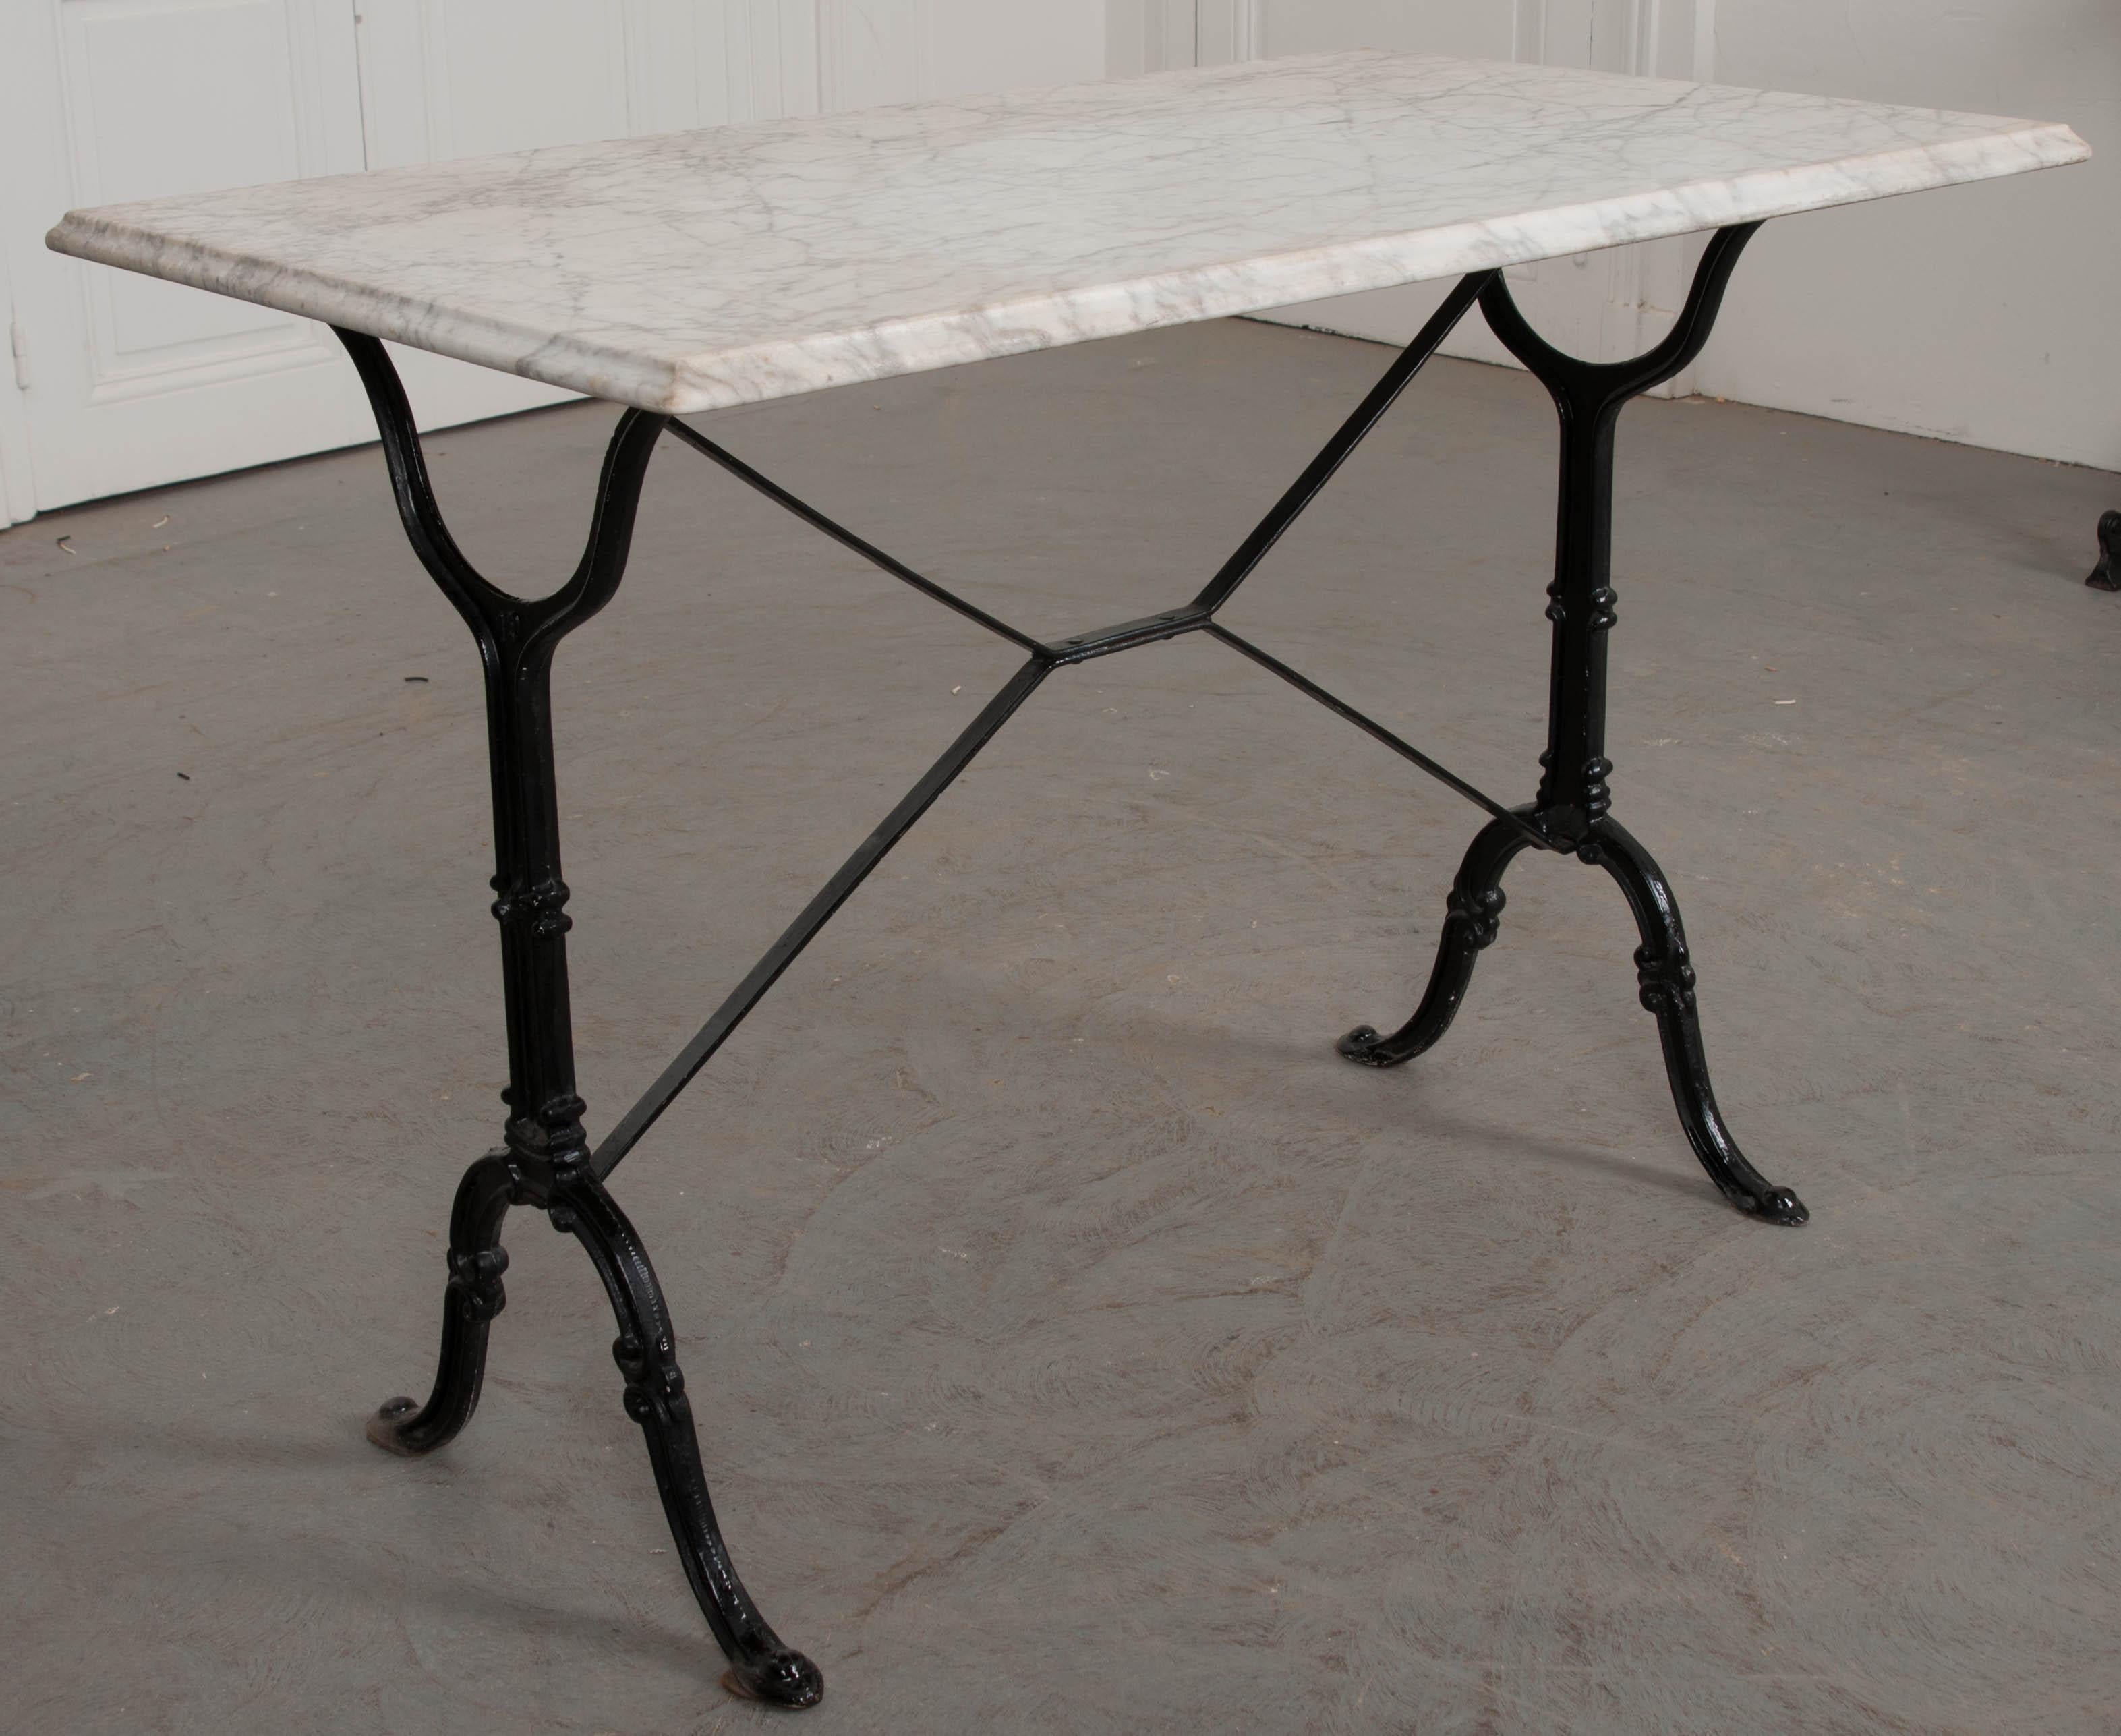 This amazing French marble top garden table was made at the beginning of the 20th century. The white marble top is in antique condition, with grey veins and an ogee finished edge. The iron base is classically styled, with fashioned upright supports,